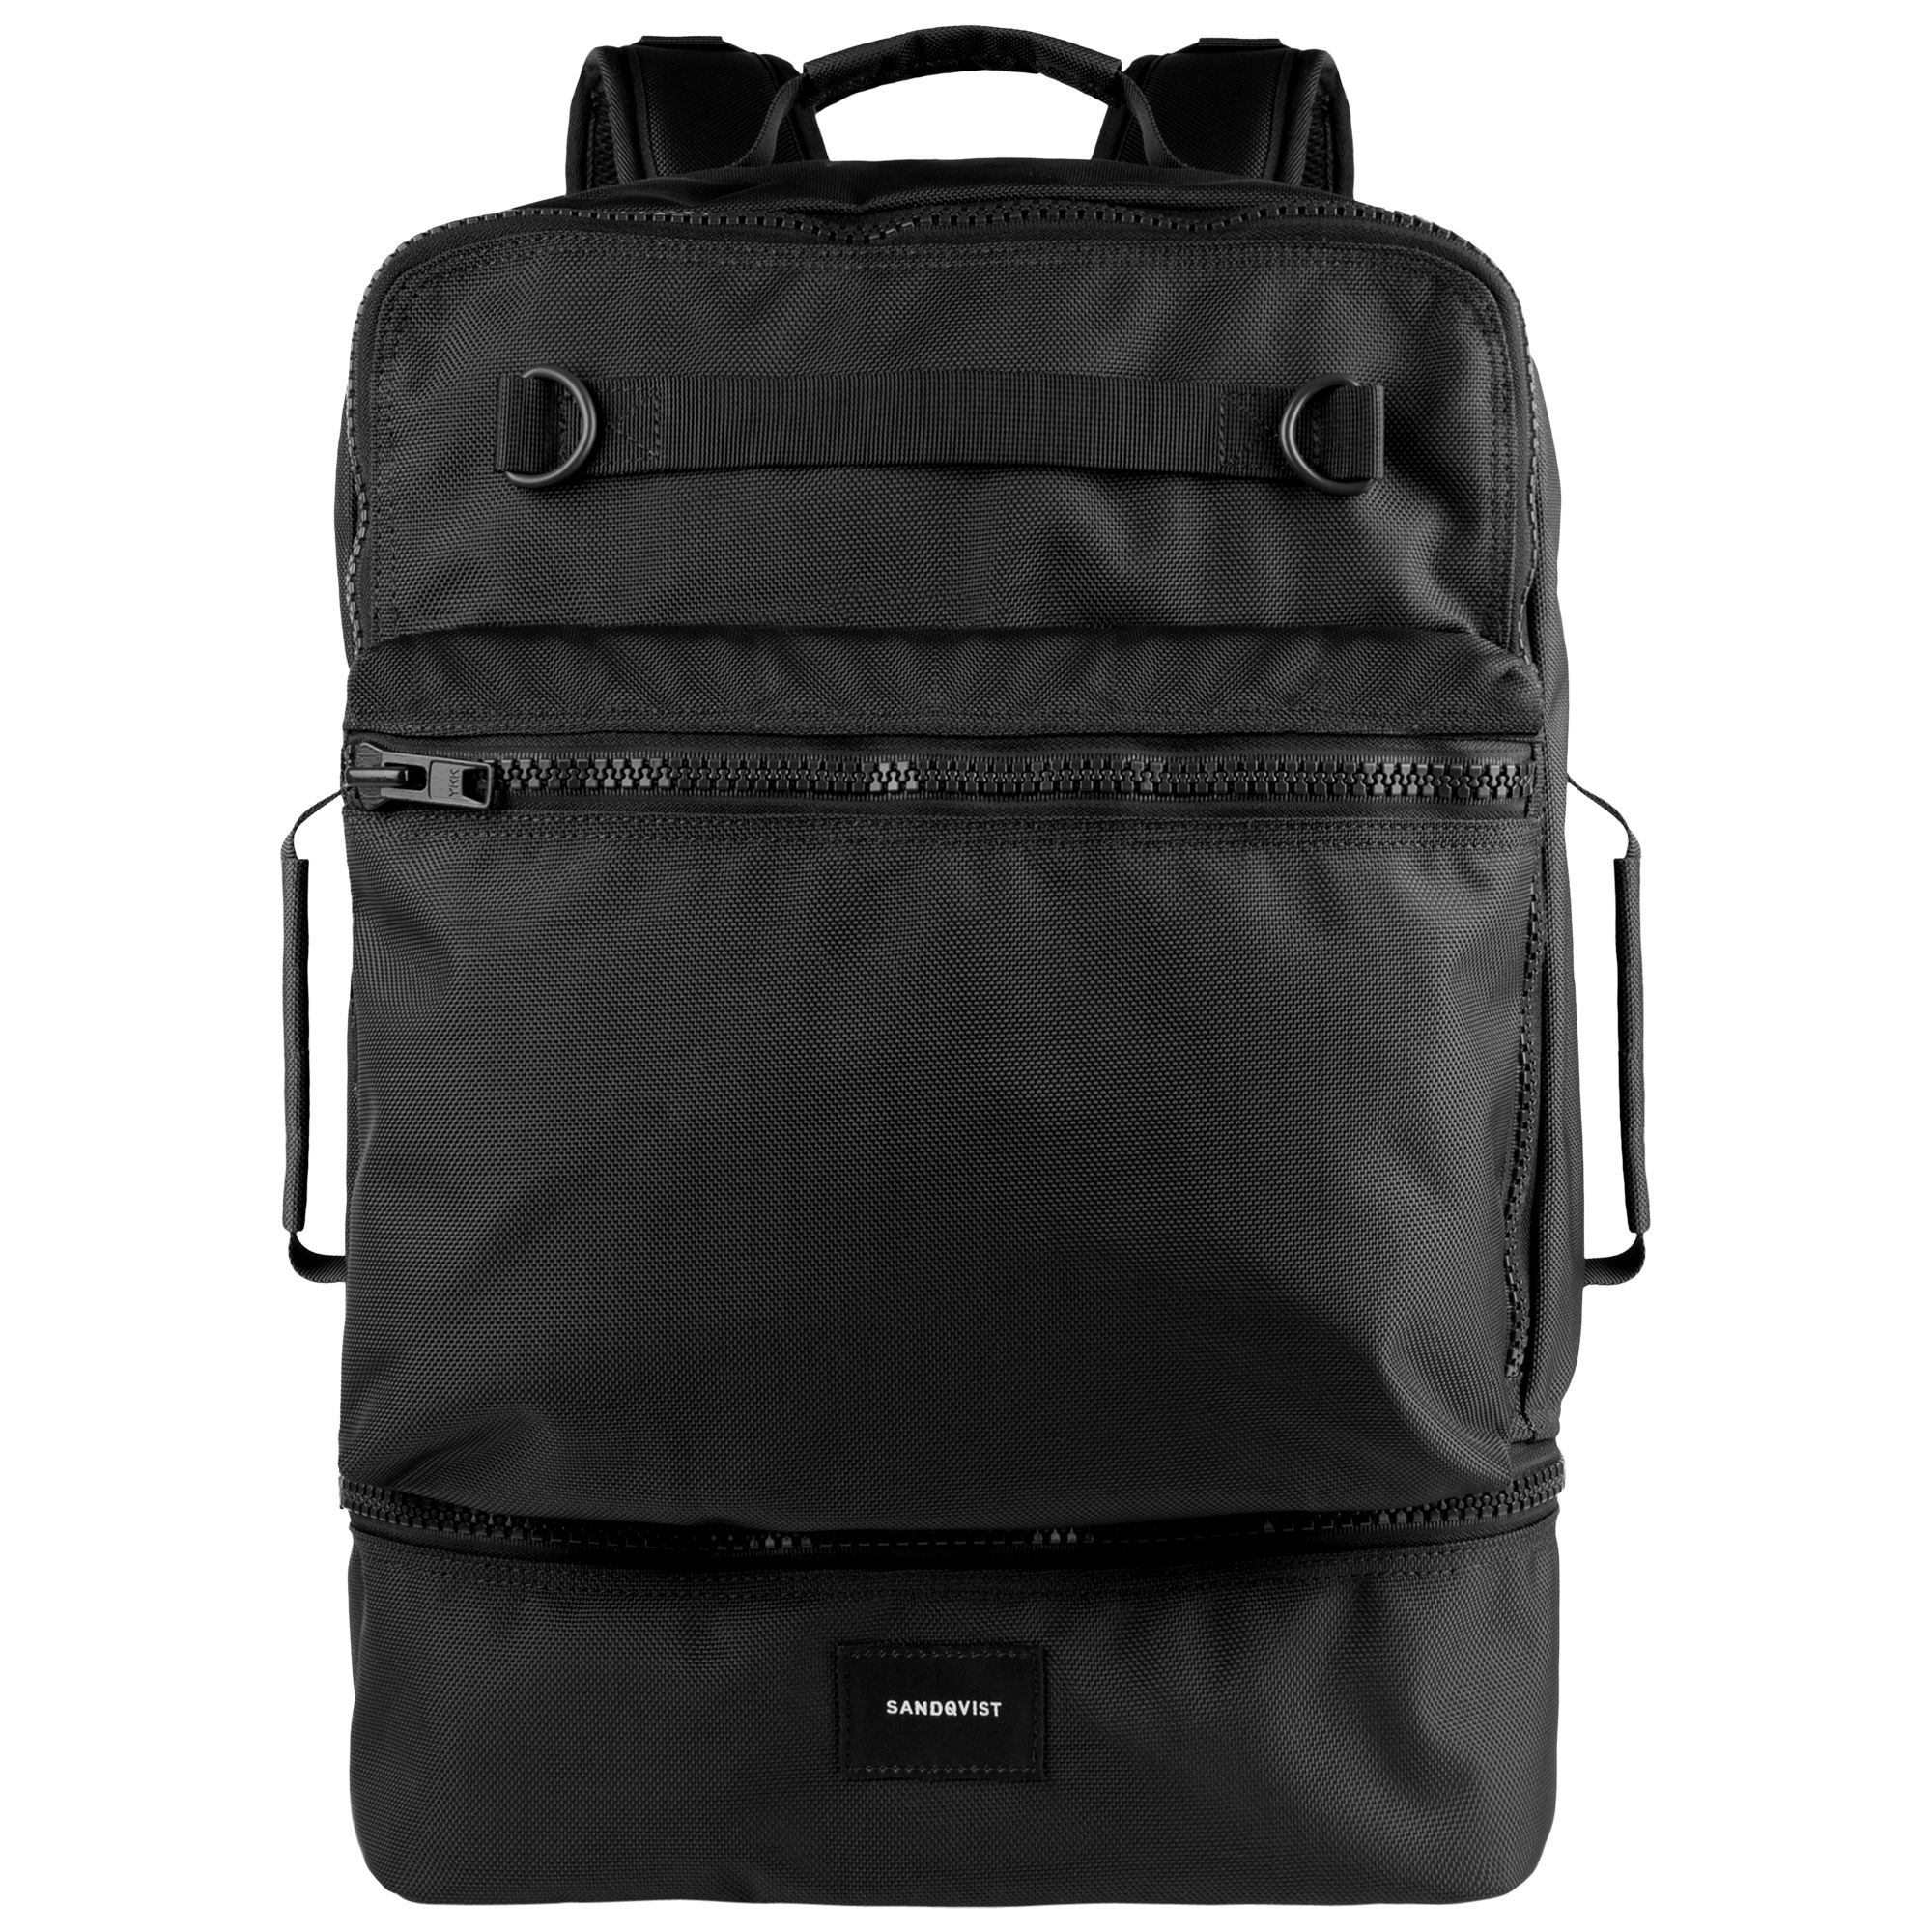 Sandqvist Algot Aerial Recycled Polyester Backpack